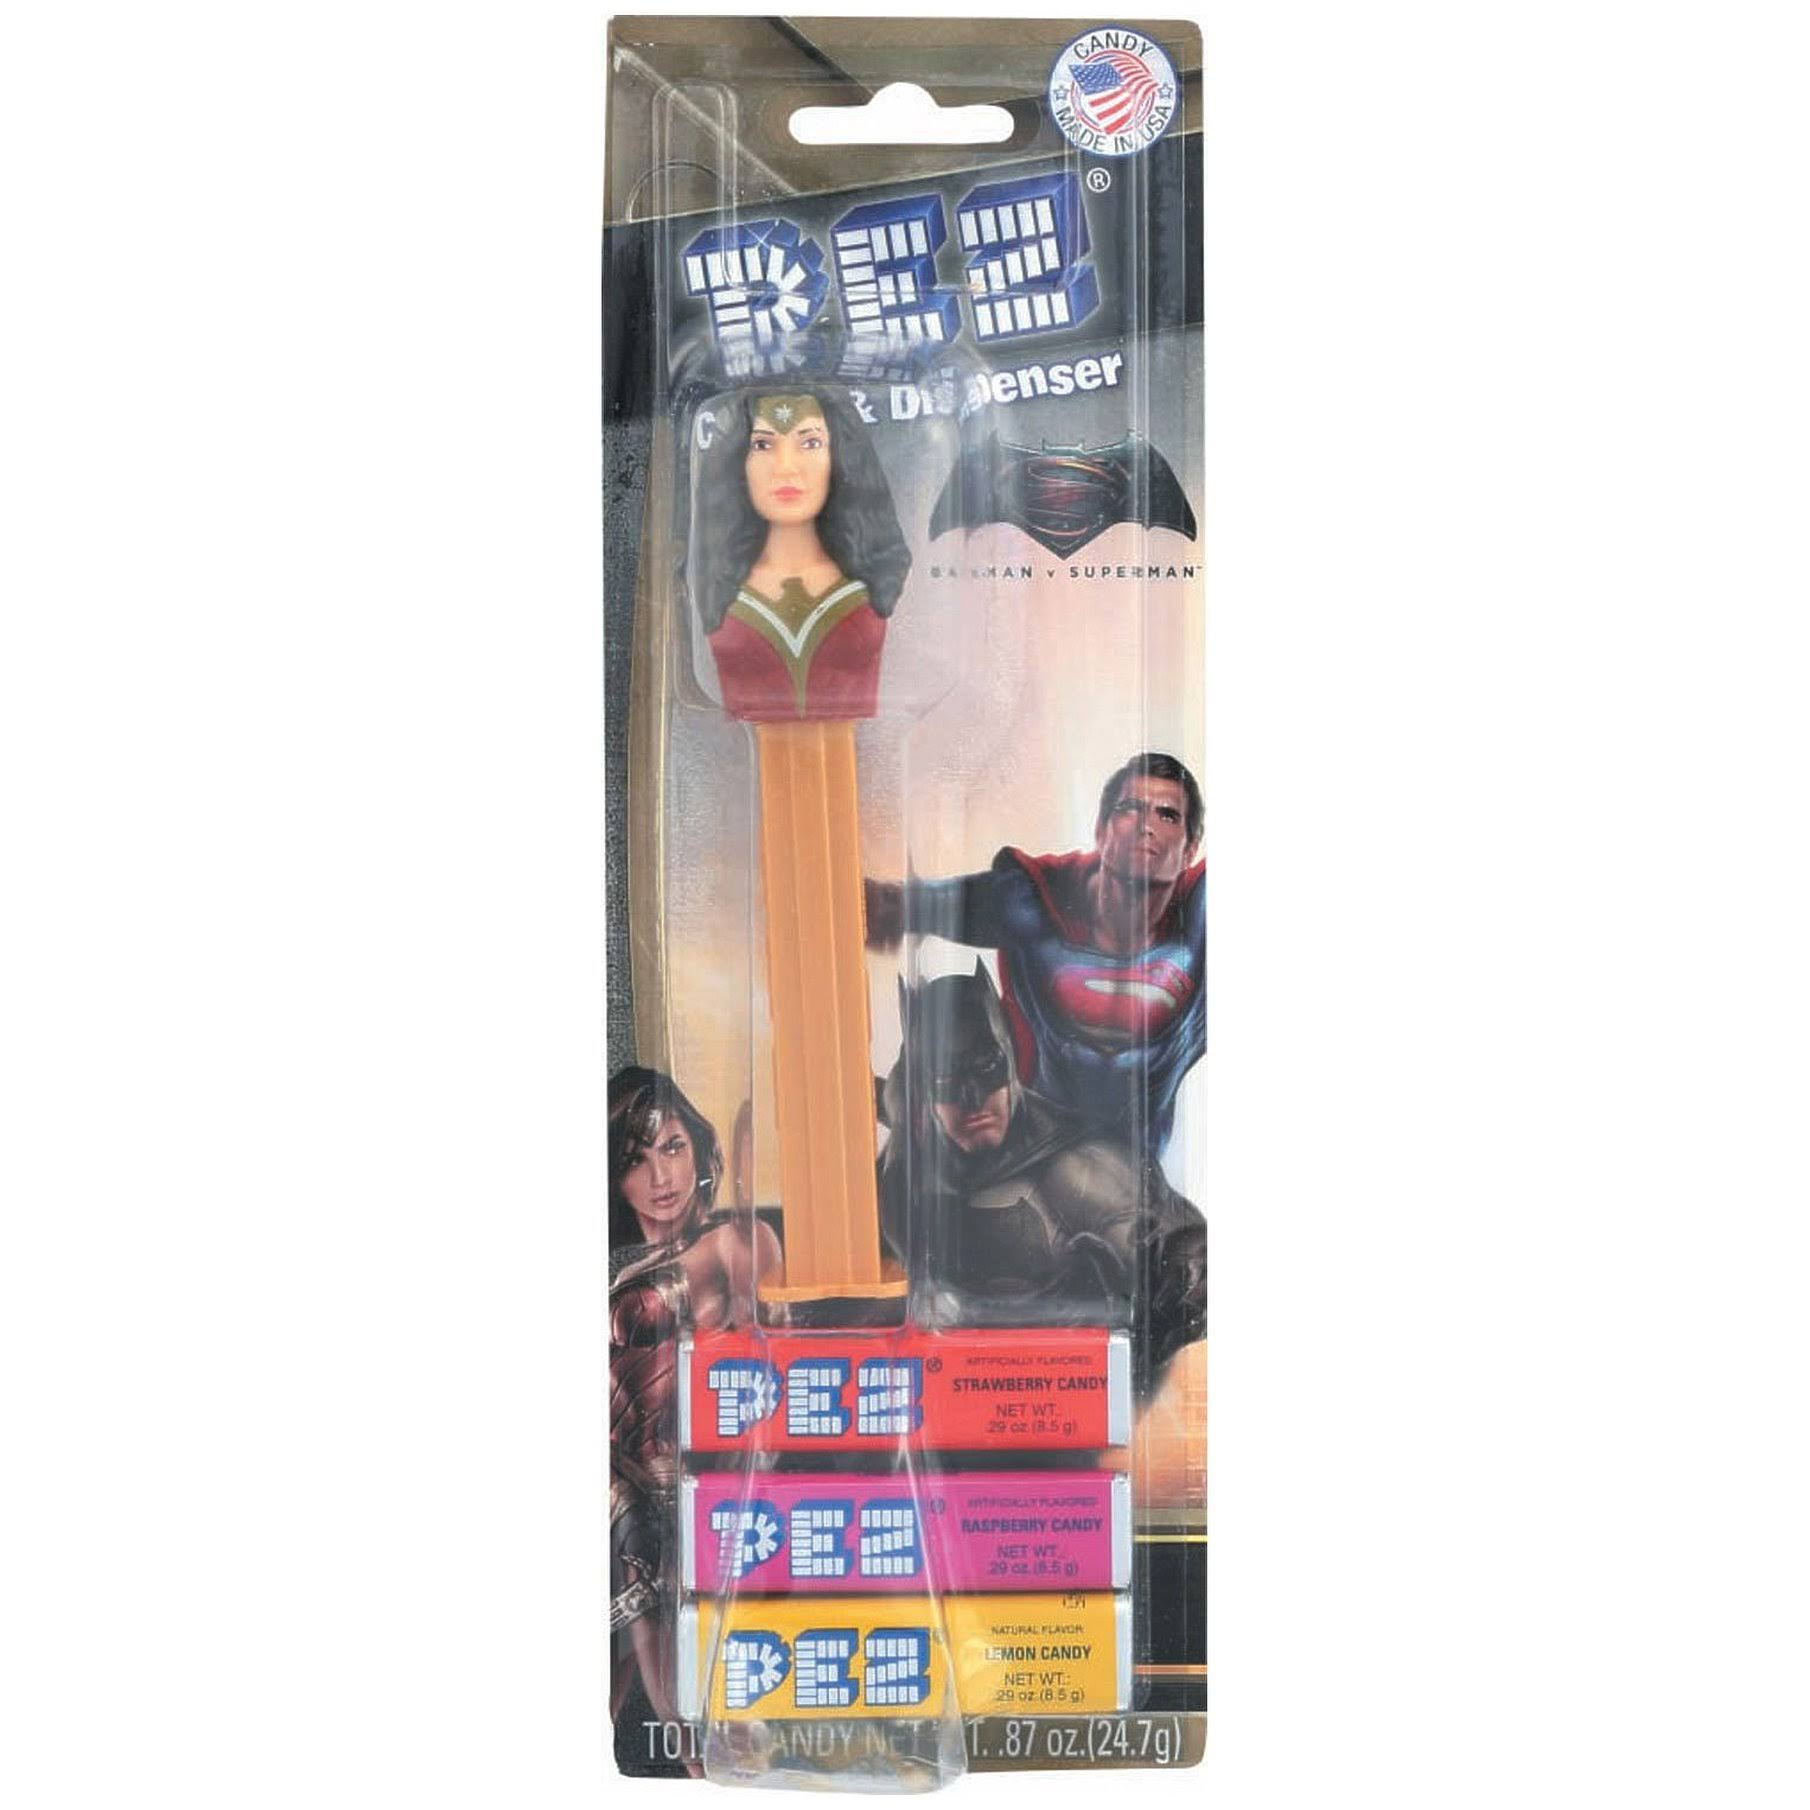 Pez Justice League Sweets Dispenser with 3 Candy Packs